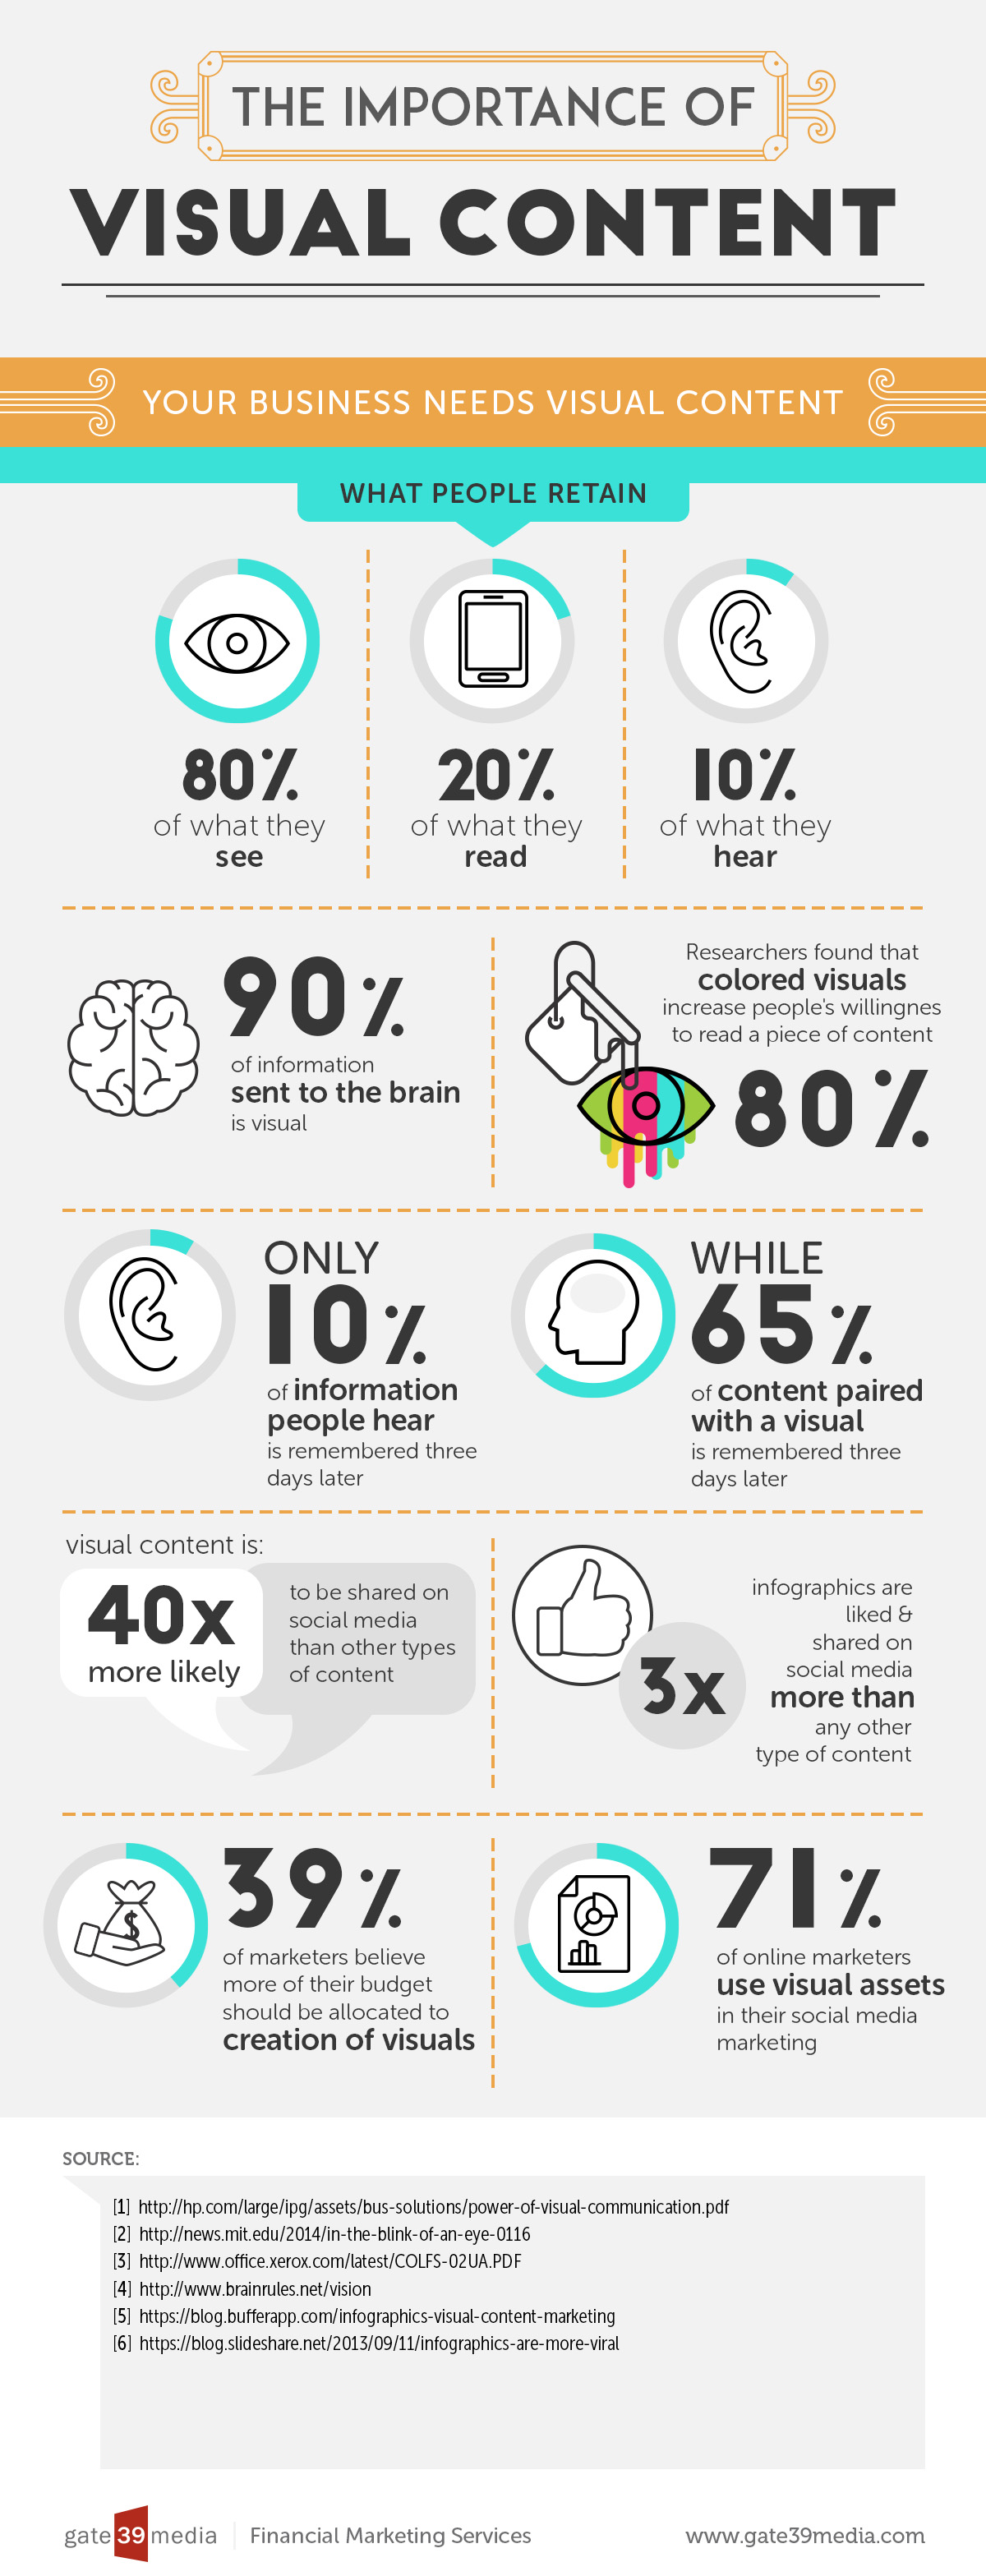 The Importance of Visual Content